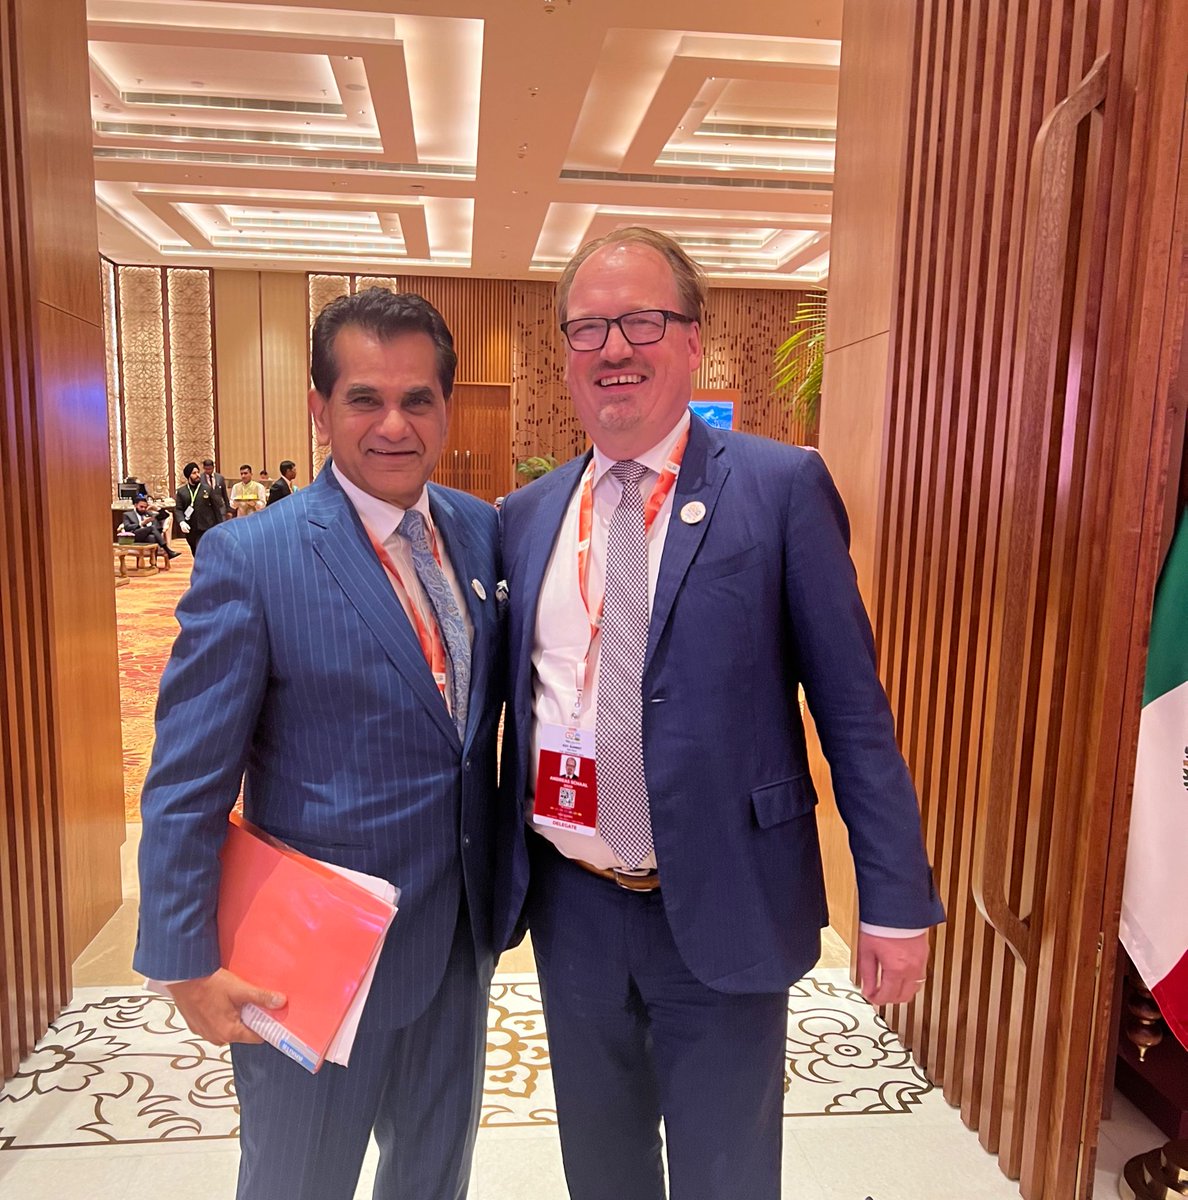 Big congratulations @amitabhk87 and 🇮🇳 for spearheading a strong and far-reaching #G20 Leaders’ Declaration in Delhi. #OECD proud to contribute to @narendramodi’s vision for One Earth, One Family, One Future through our work on SDGs, climate #IFCMA, tax, skills, gender & digital